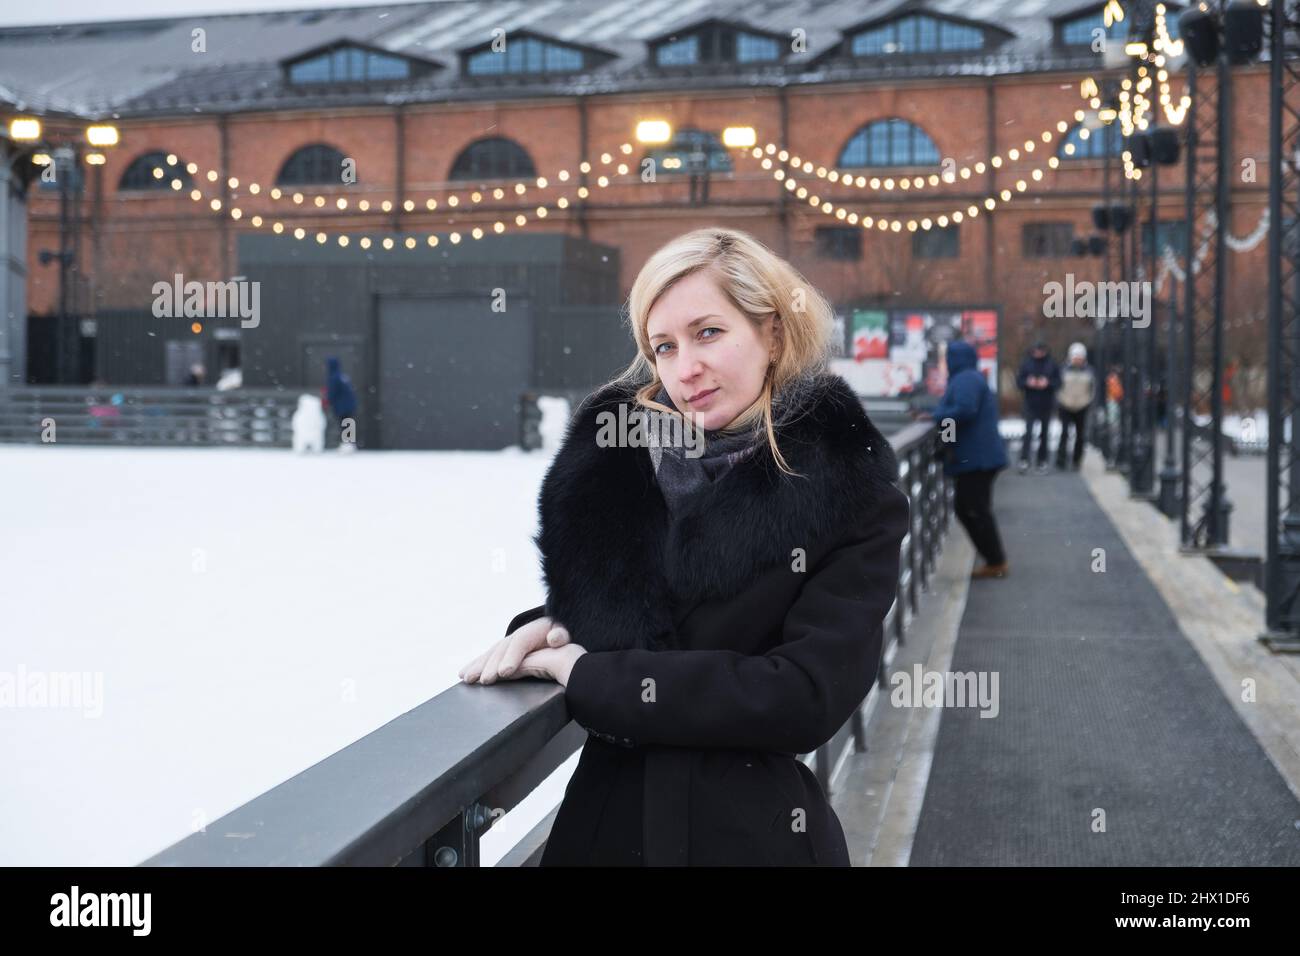 Blonde woman in coat with fur collar stands at side of ice rink. Stock Photo